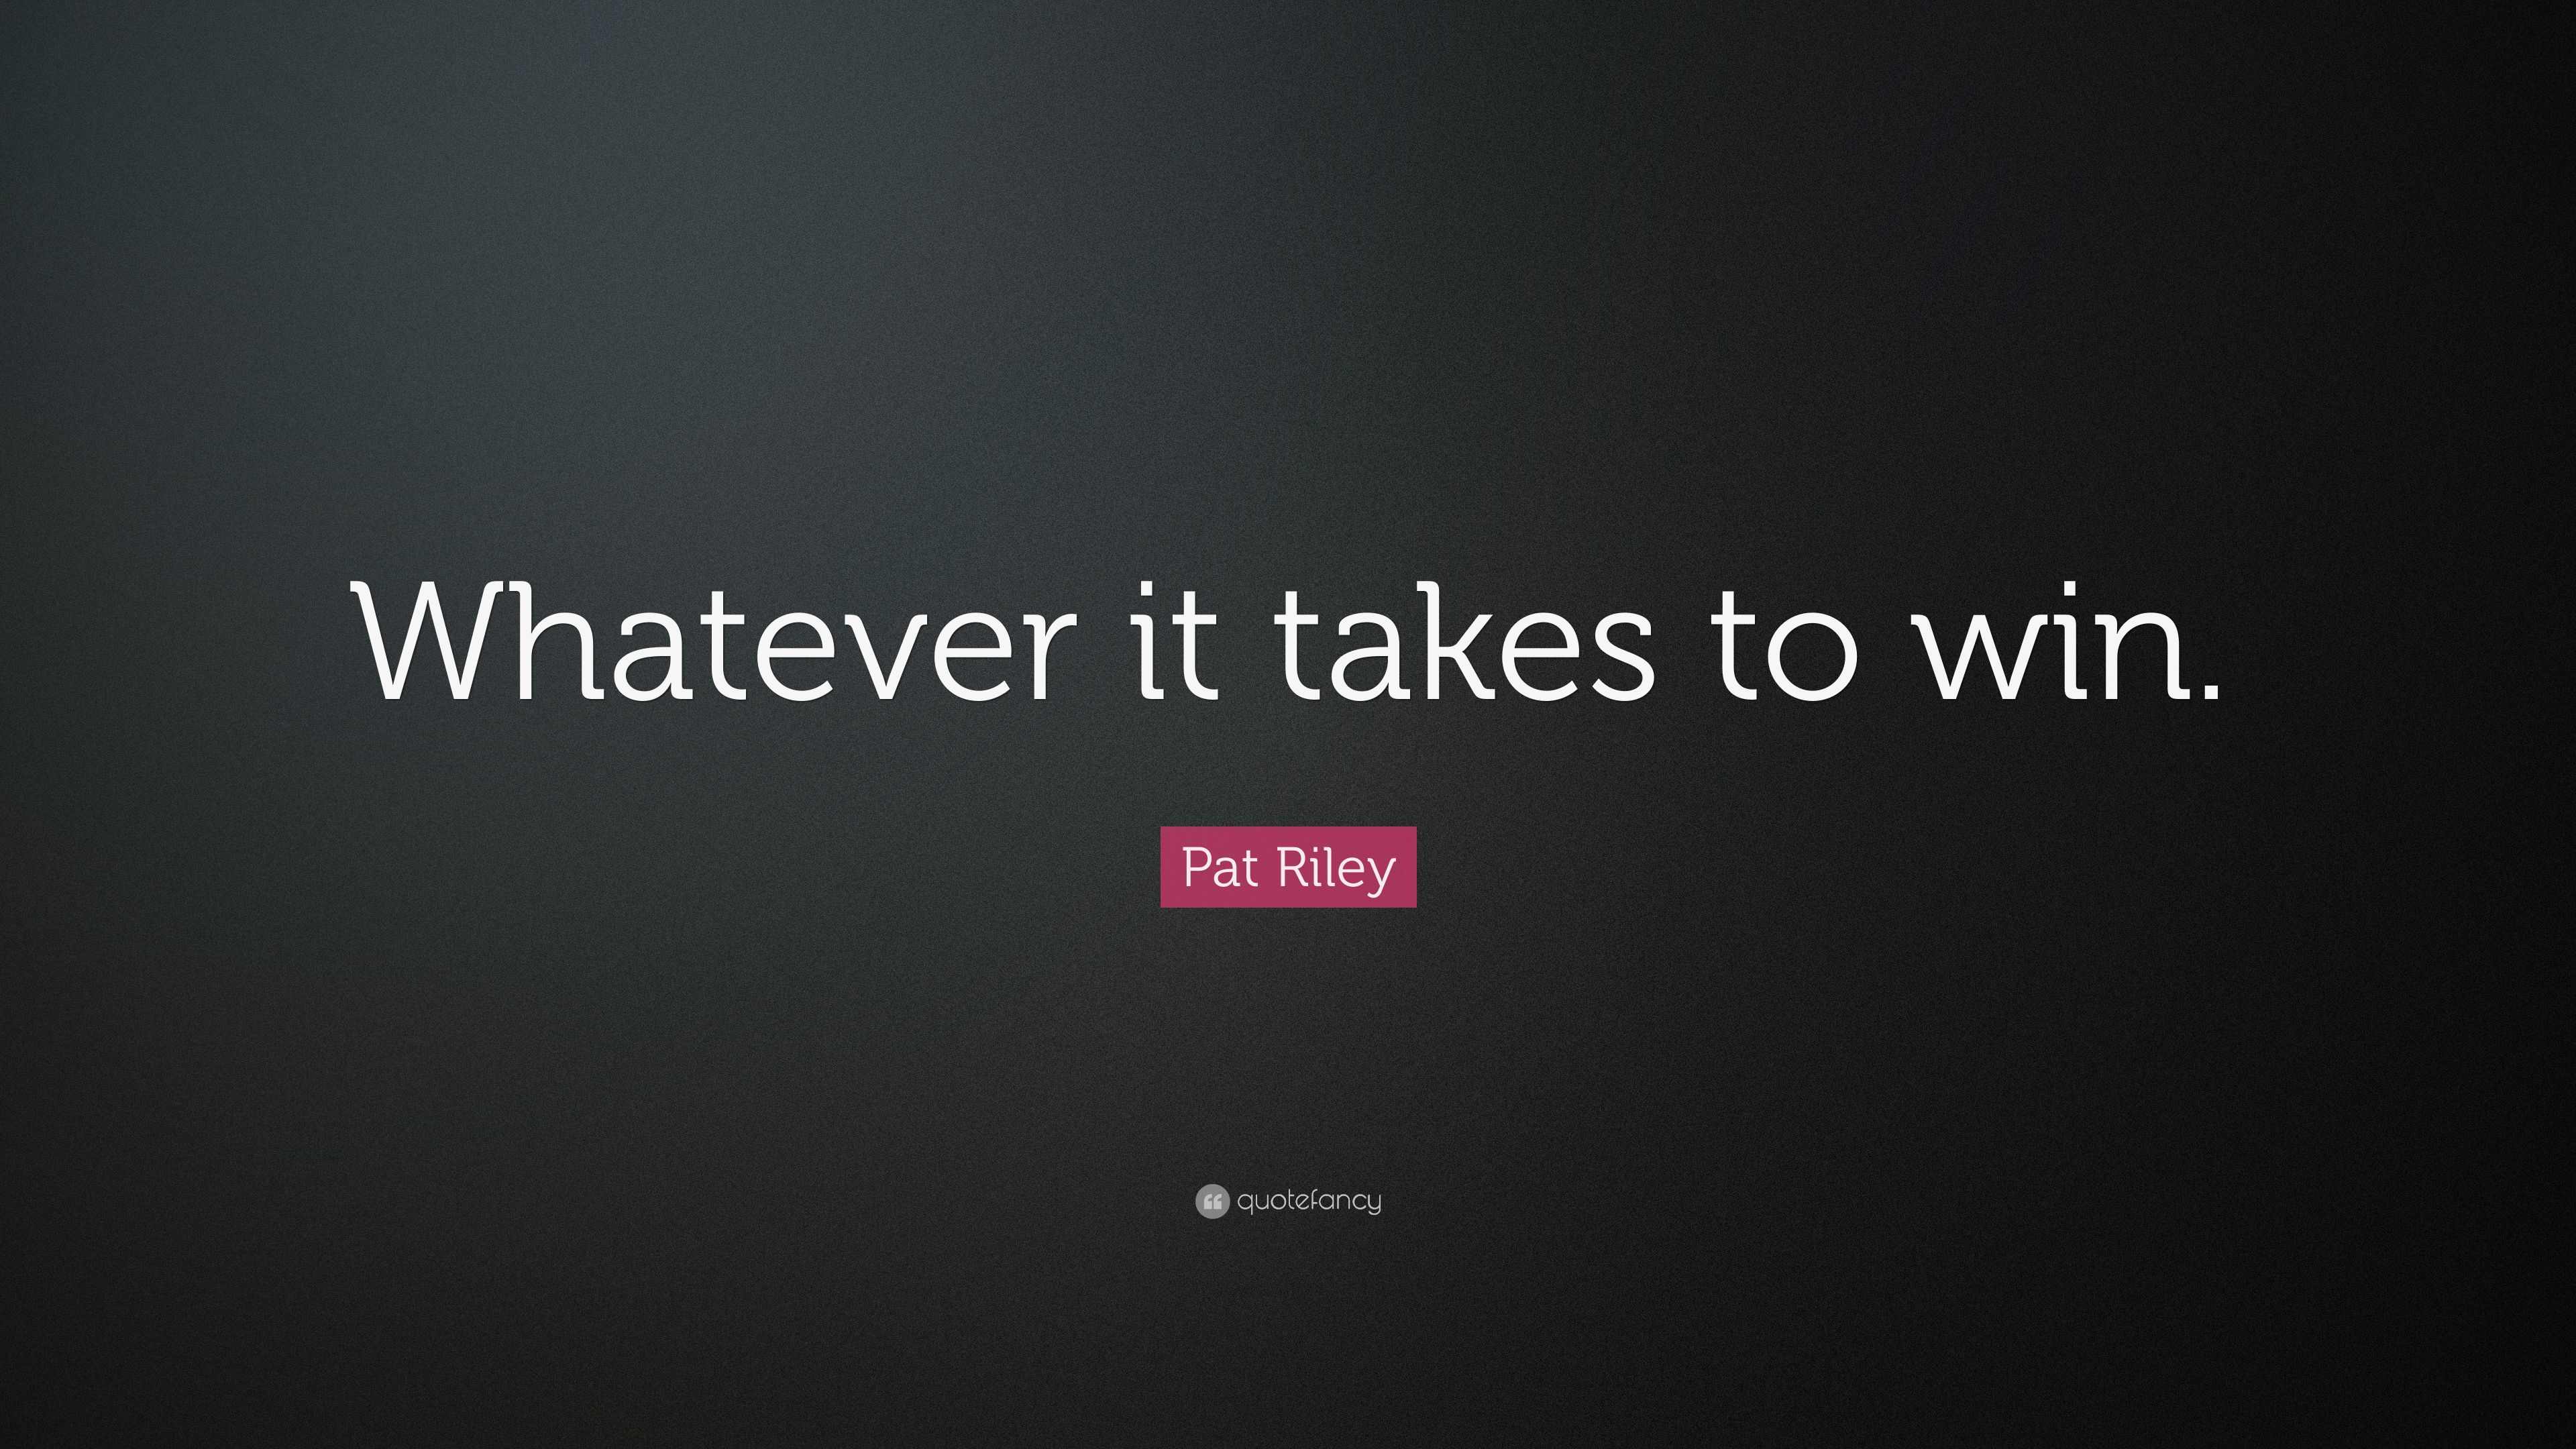 Pat Riley Quote: “Whatever it takes to win.” (9 wallpaper)